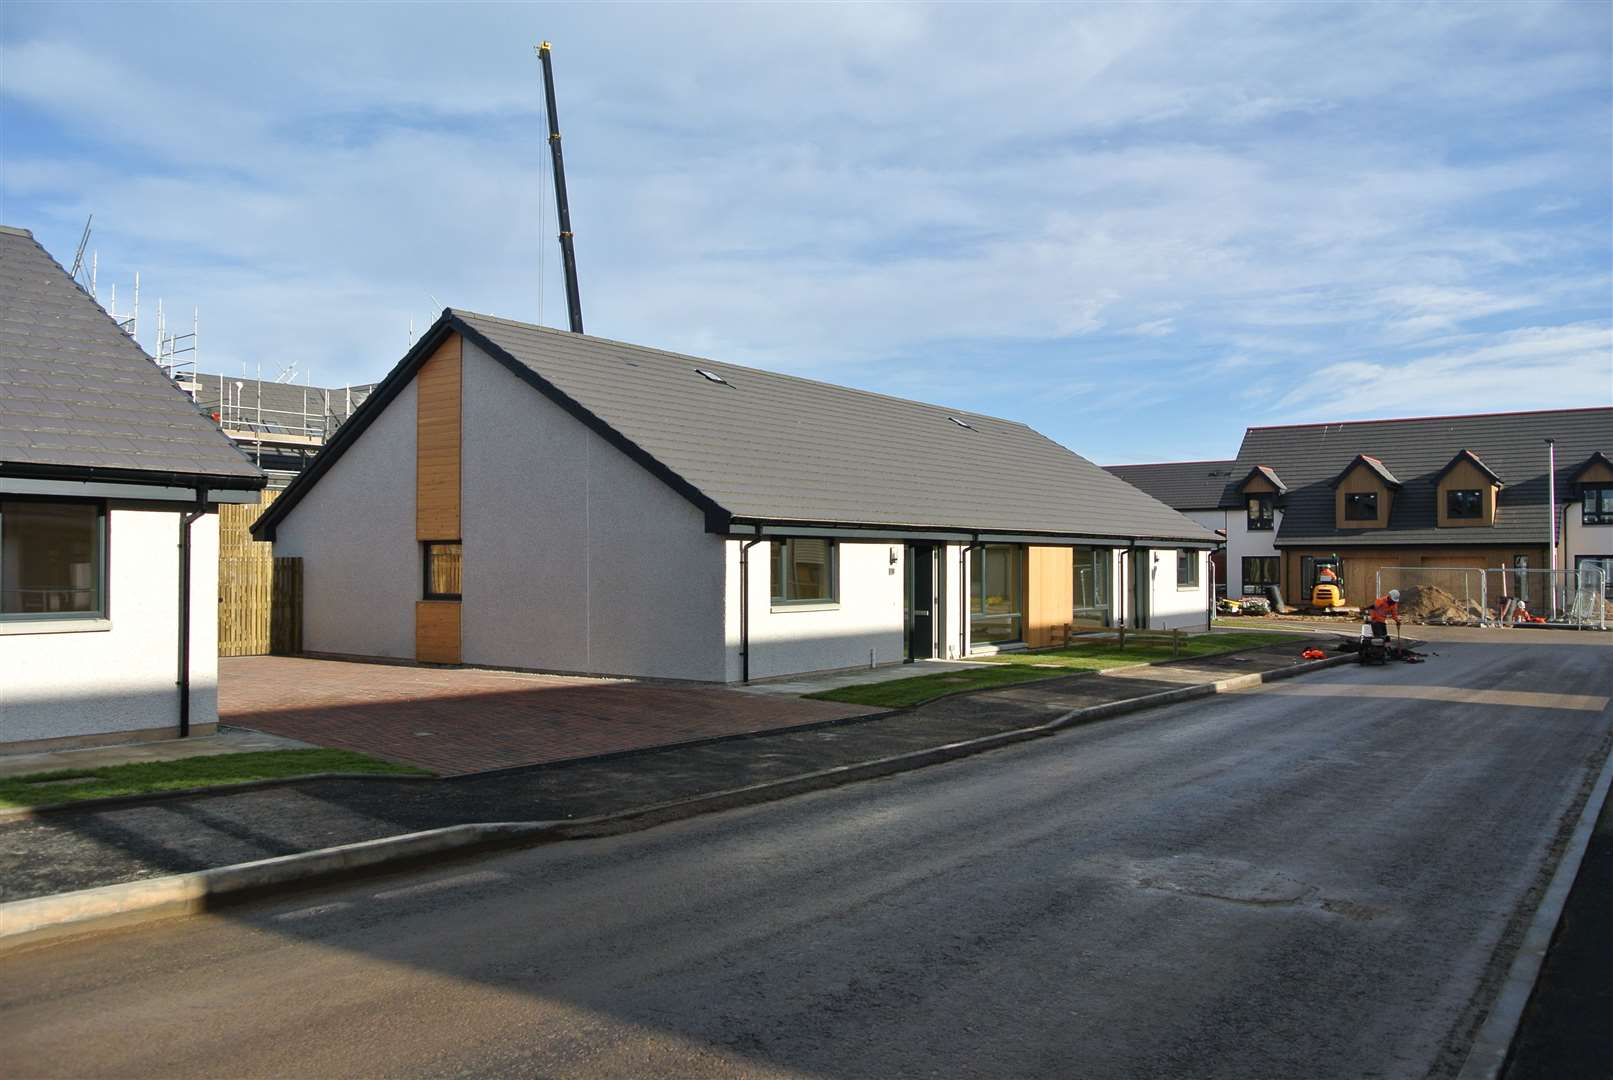 Moray Council’s proposed Local Development Plan, which sets out priority growth areas for housing, has been approved by the Scottish Government.